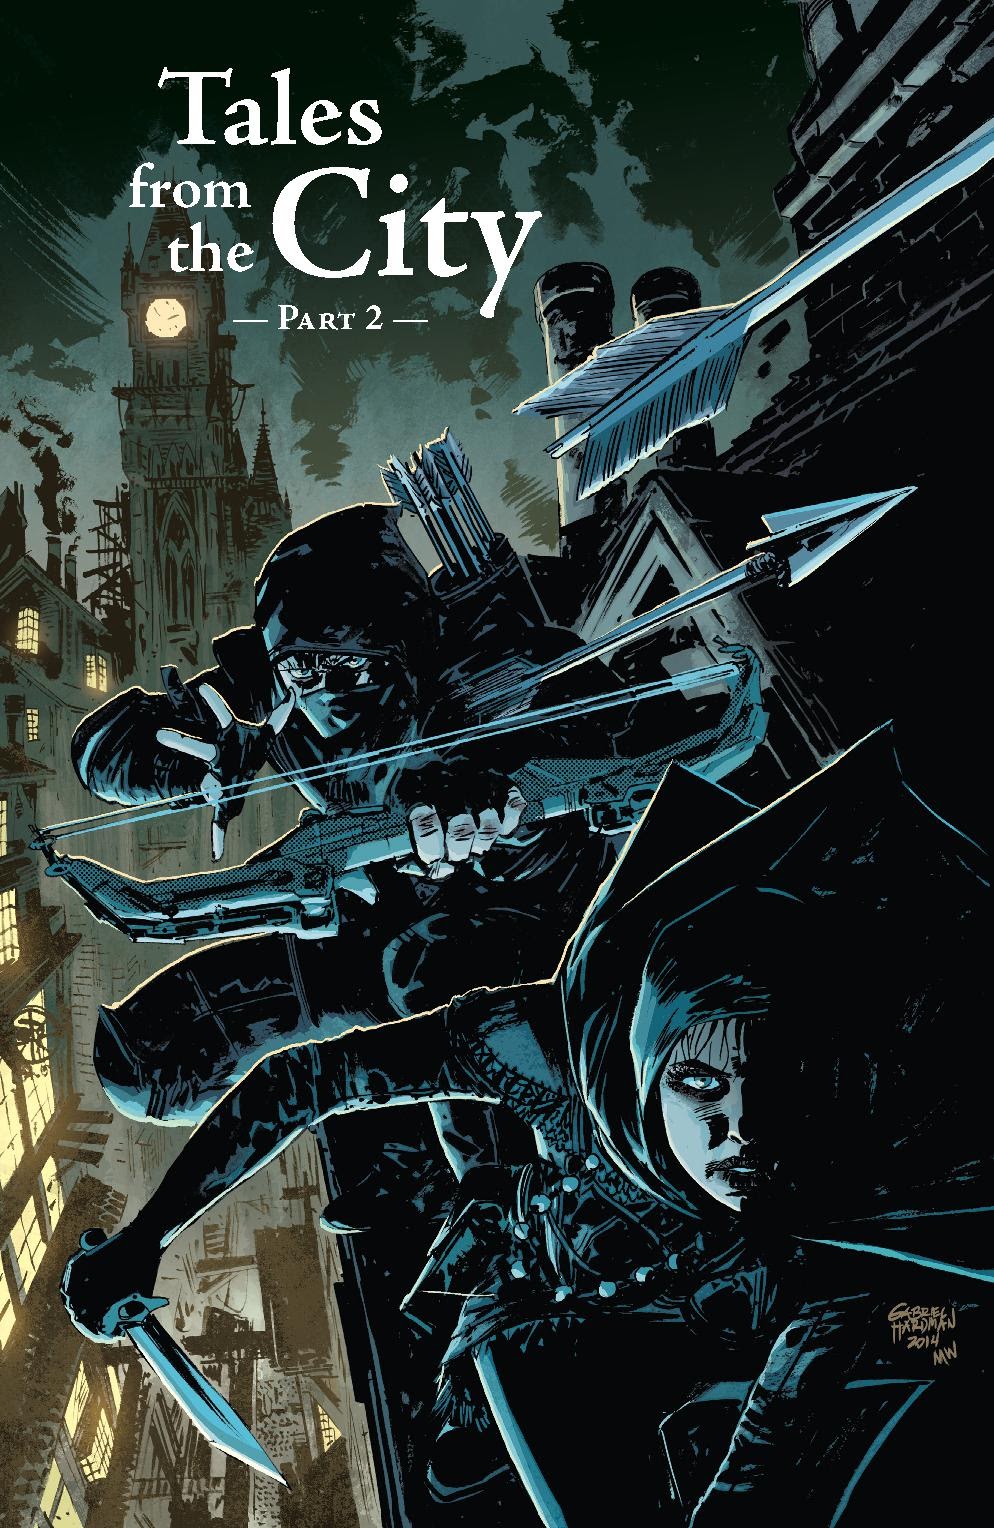 Read online Thief: Tales from the City comic -  Issue # Full - 15